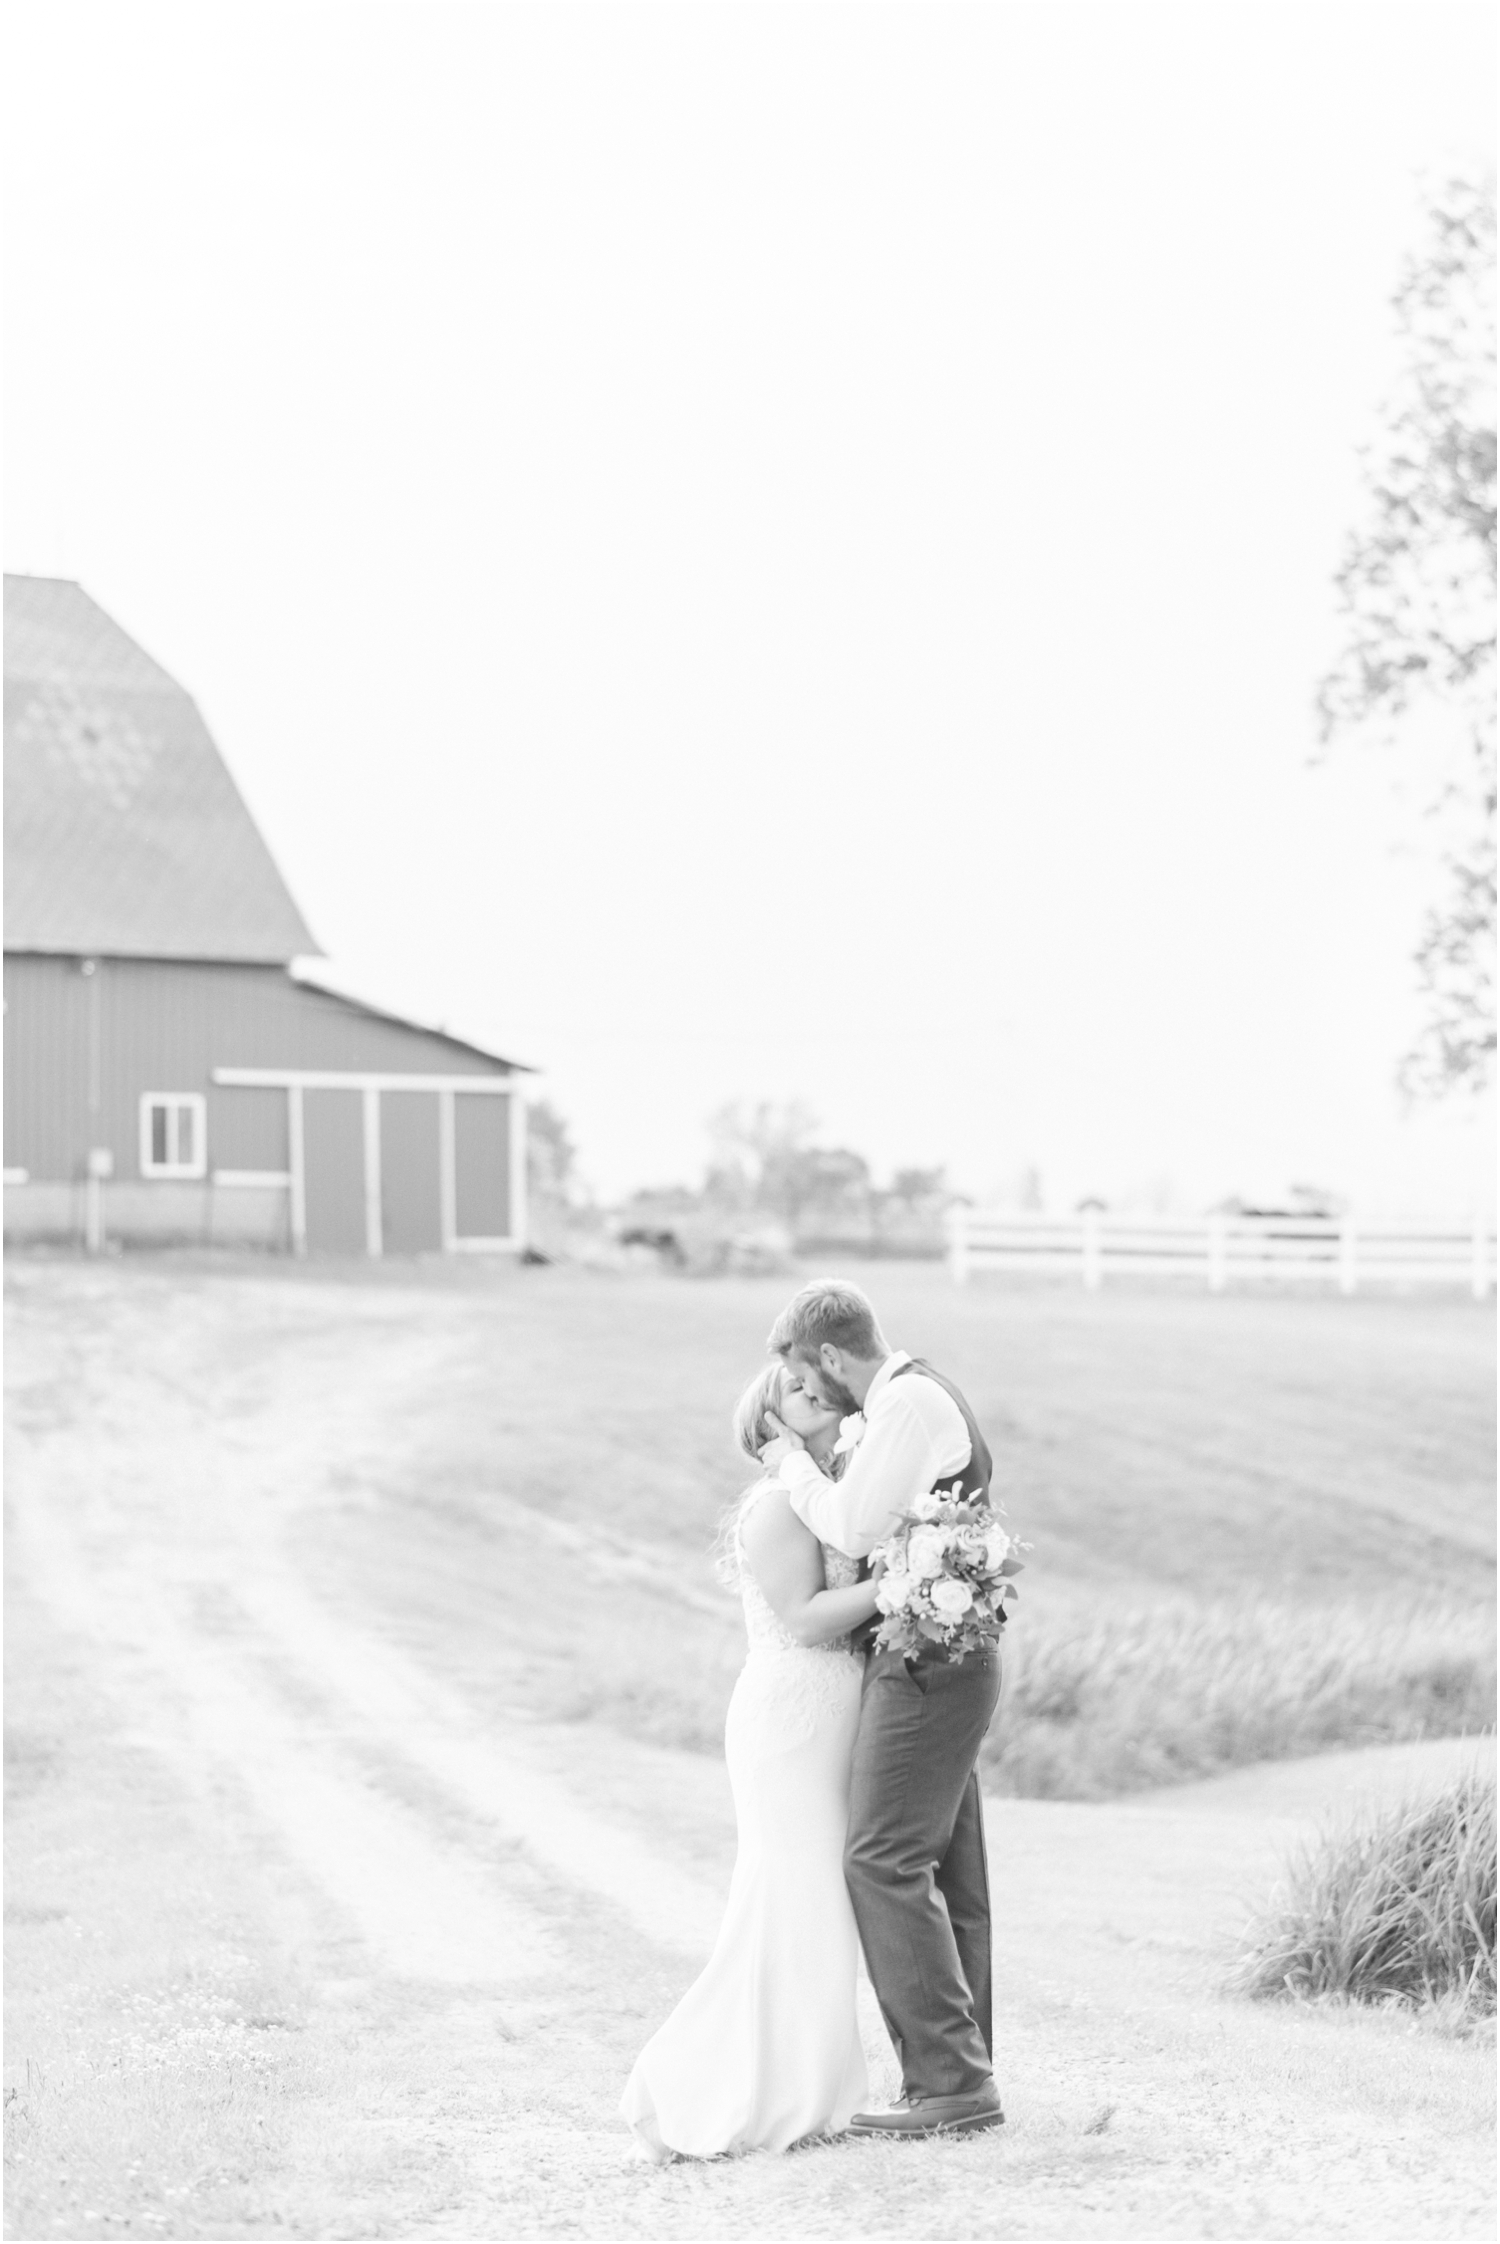 Sunset Bride and Groom Portraits Wedding Photography Blush and Slate Blue Wedding Heritage Farm and Events Indiana Wedding Photographer Rose Courts Photography